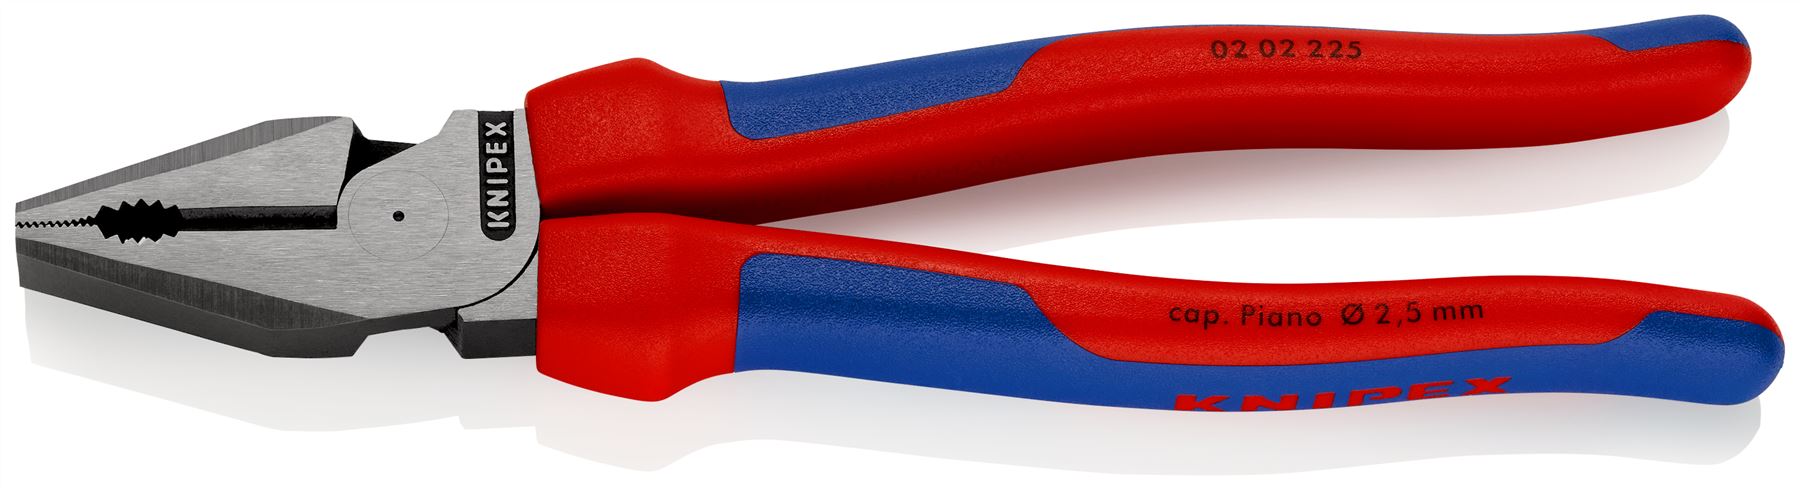 KNIPEX Combination Pliers High Leverage 225mm Multi Component Grips 02 02 255 SB